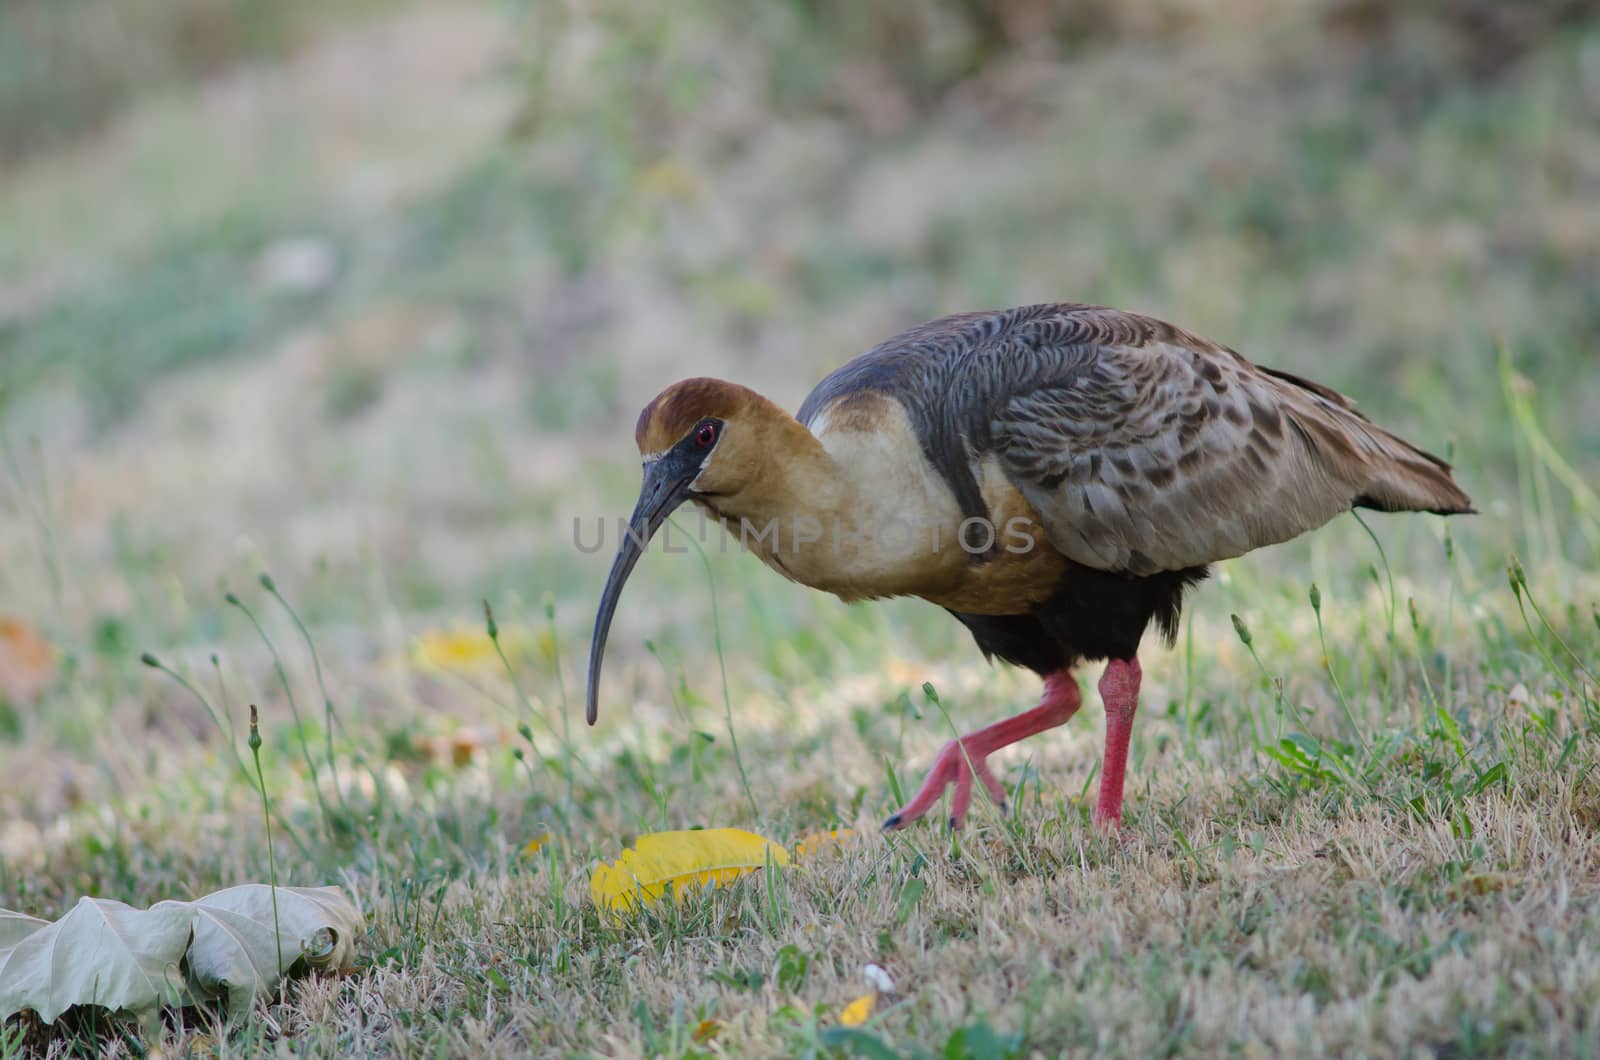 Black-faced ibis Theristicus melanopis in a meadow. by VictorSuarez